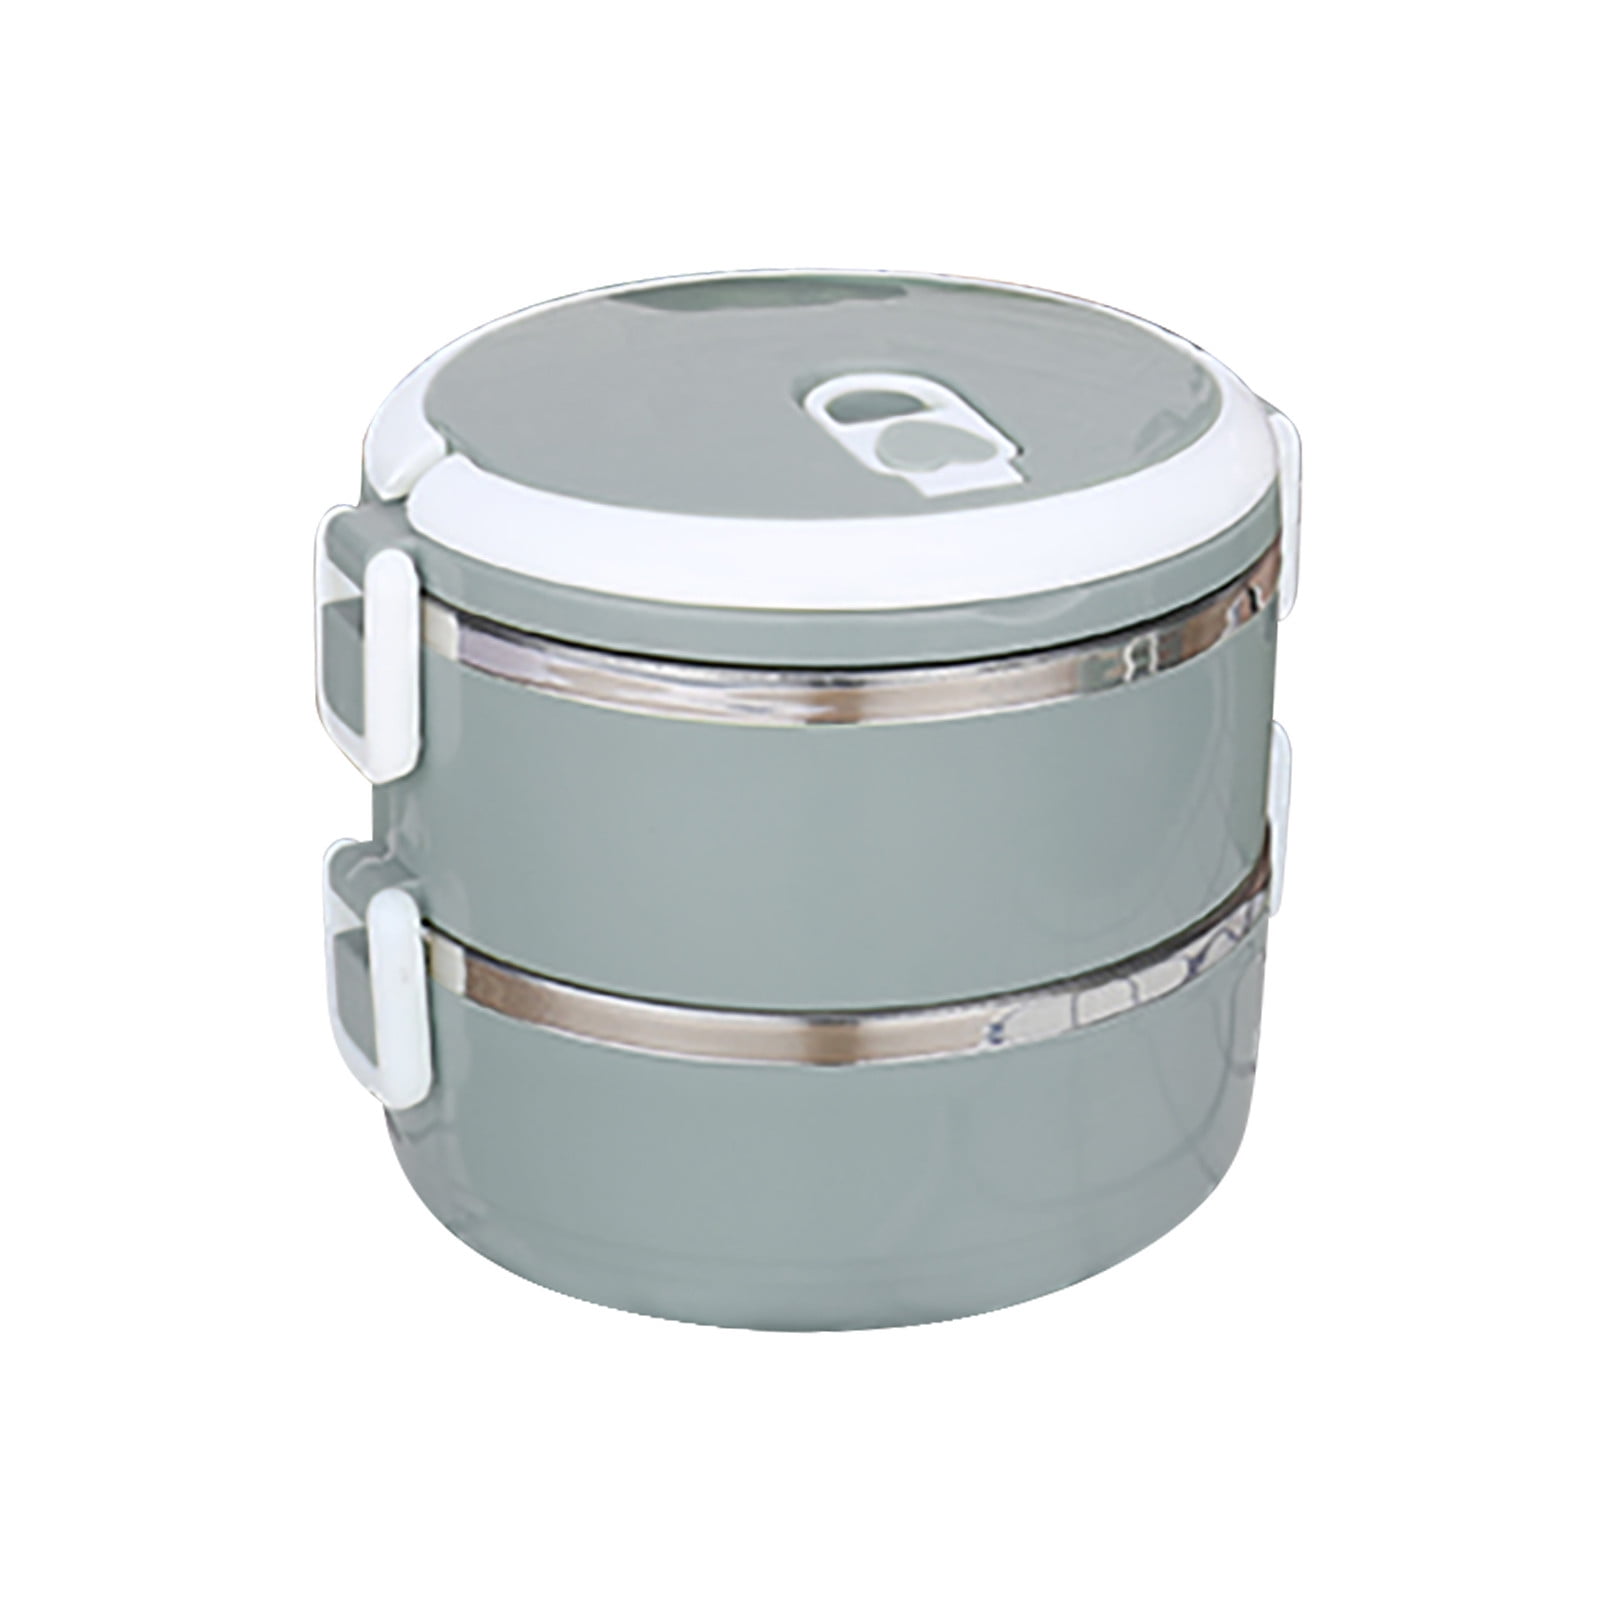 Aohea Portable Folding Bento Lunch Box with Stainless Steel